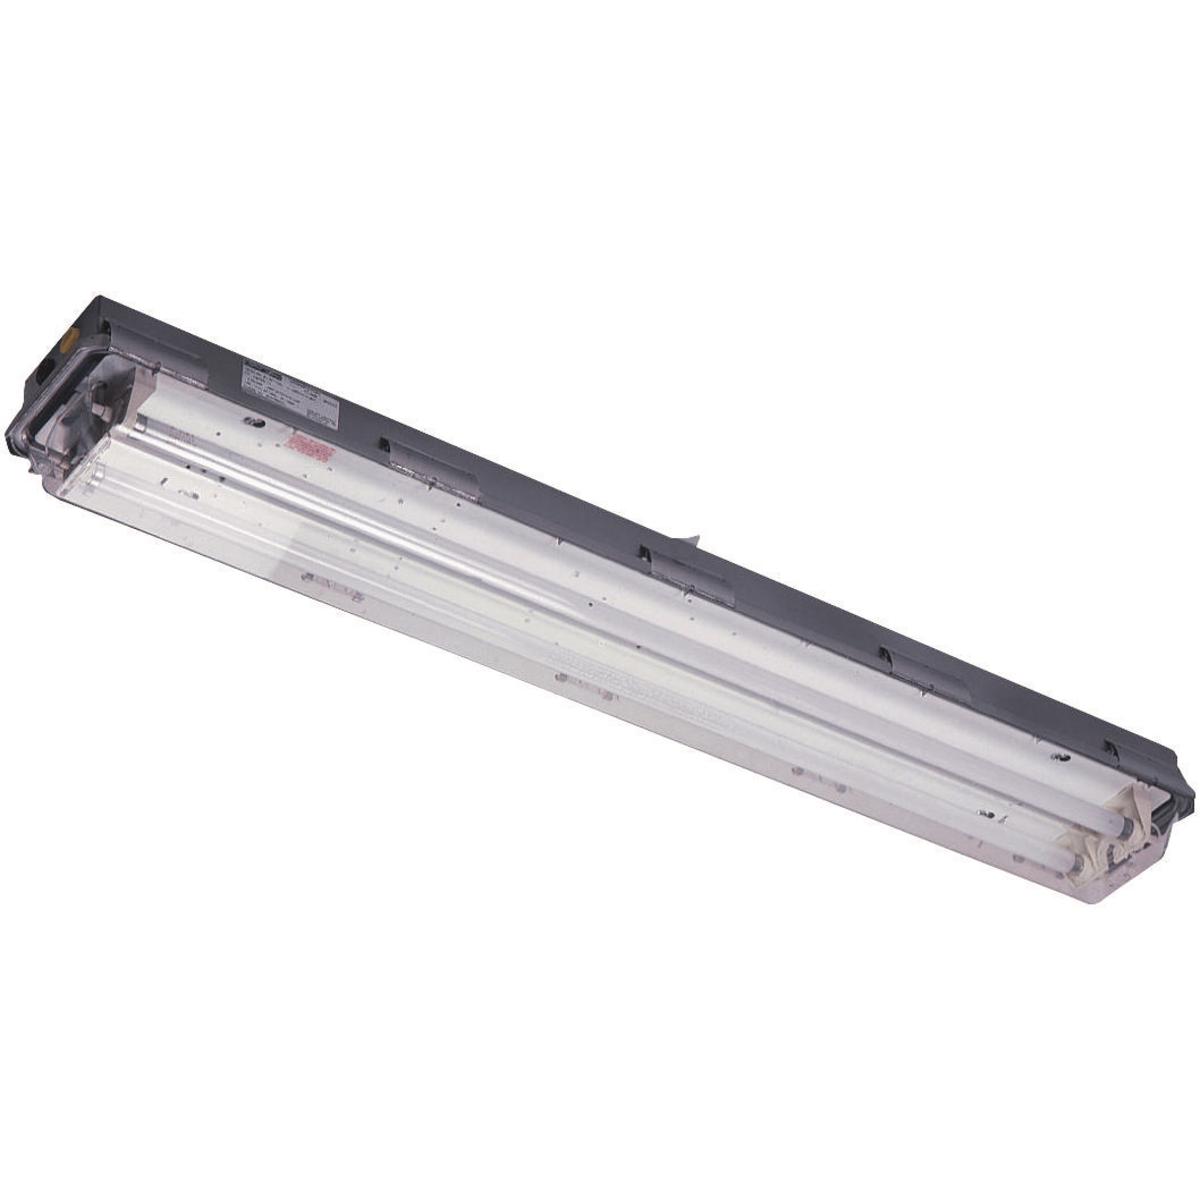 Hubbell LZ2S54333 LZ2S Series - Stainless Steel 54 Watt Fluorescent Light Fixture (Three 4-Foot Lamps Not Included) - Double-Ended Lamp Type - 347-480V - Hub Size 3/4 Inch NPT  ; NEMA 4X & IP66 rated stainless enclosure with Lexan® impact resistant polycarbonate lens. ; Tw